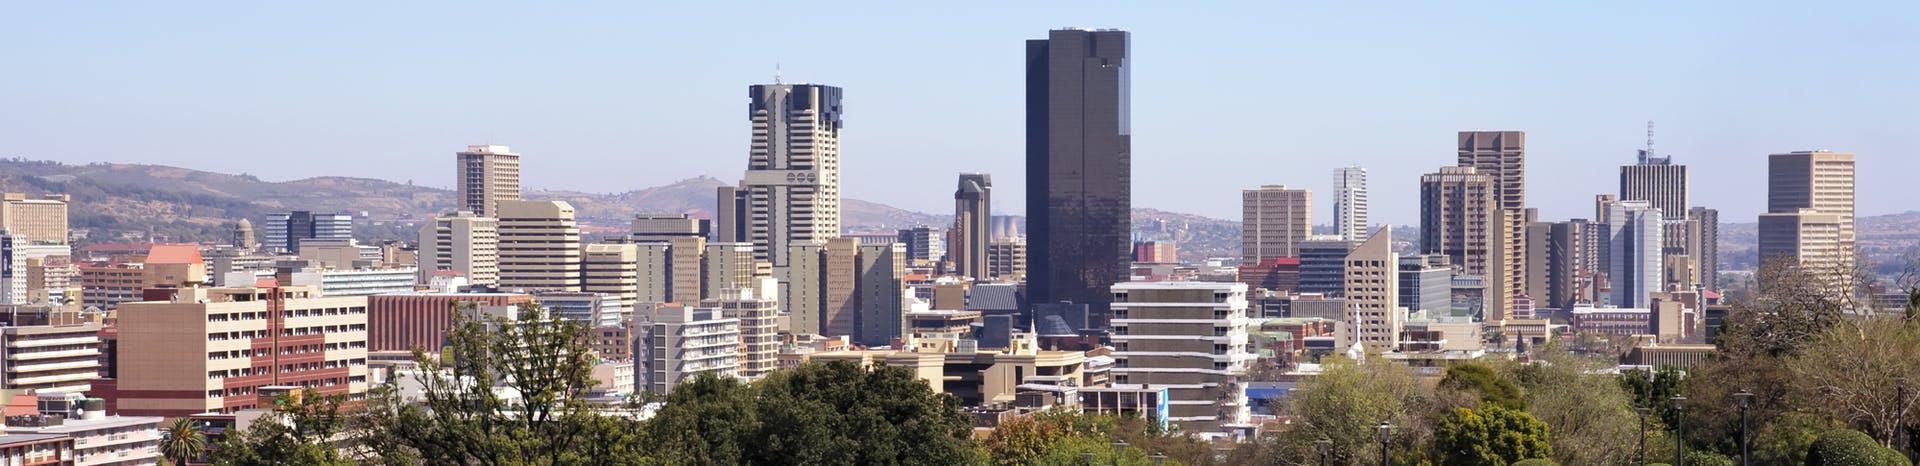 Picture of Midrand